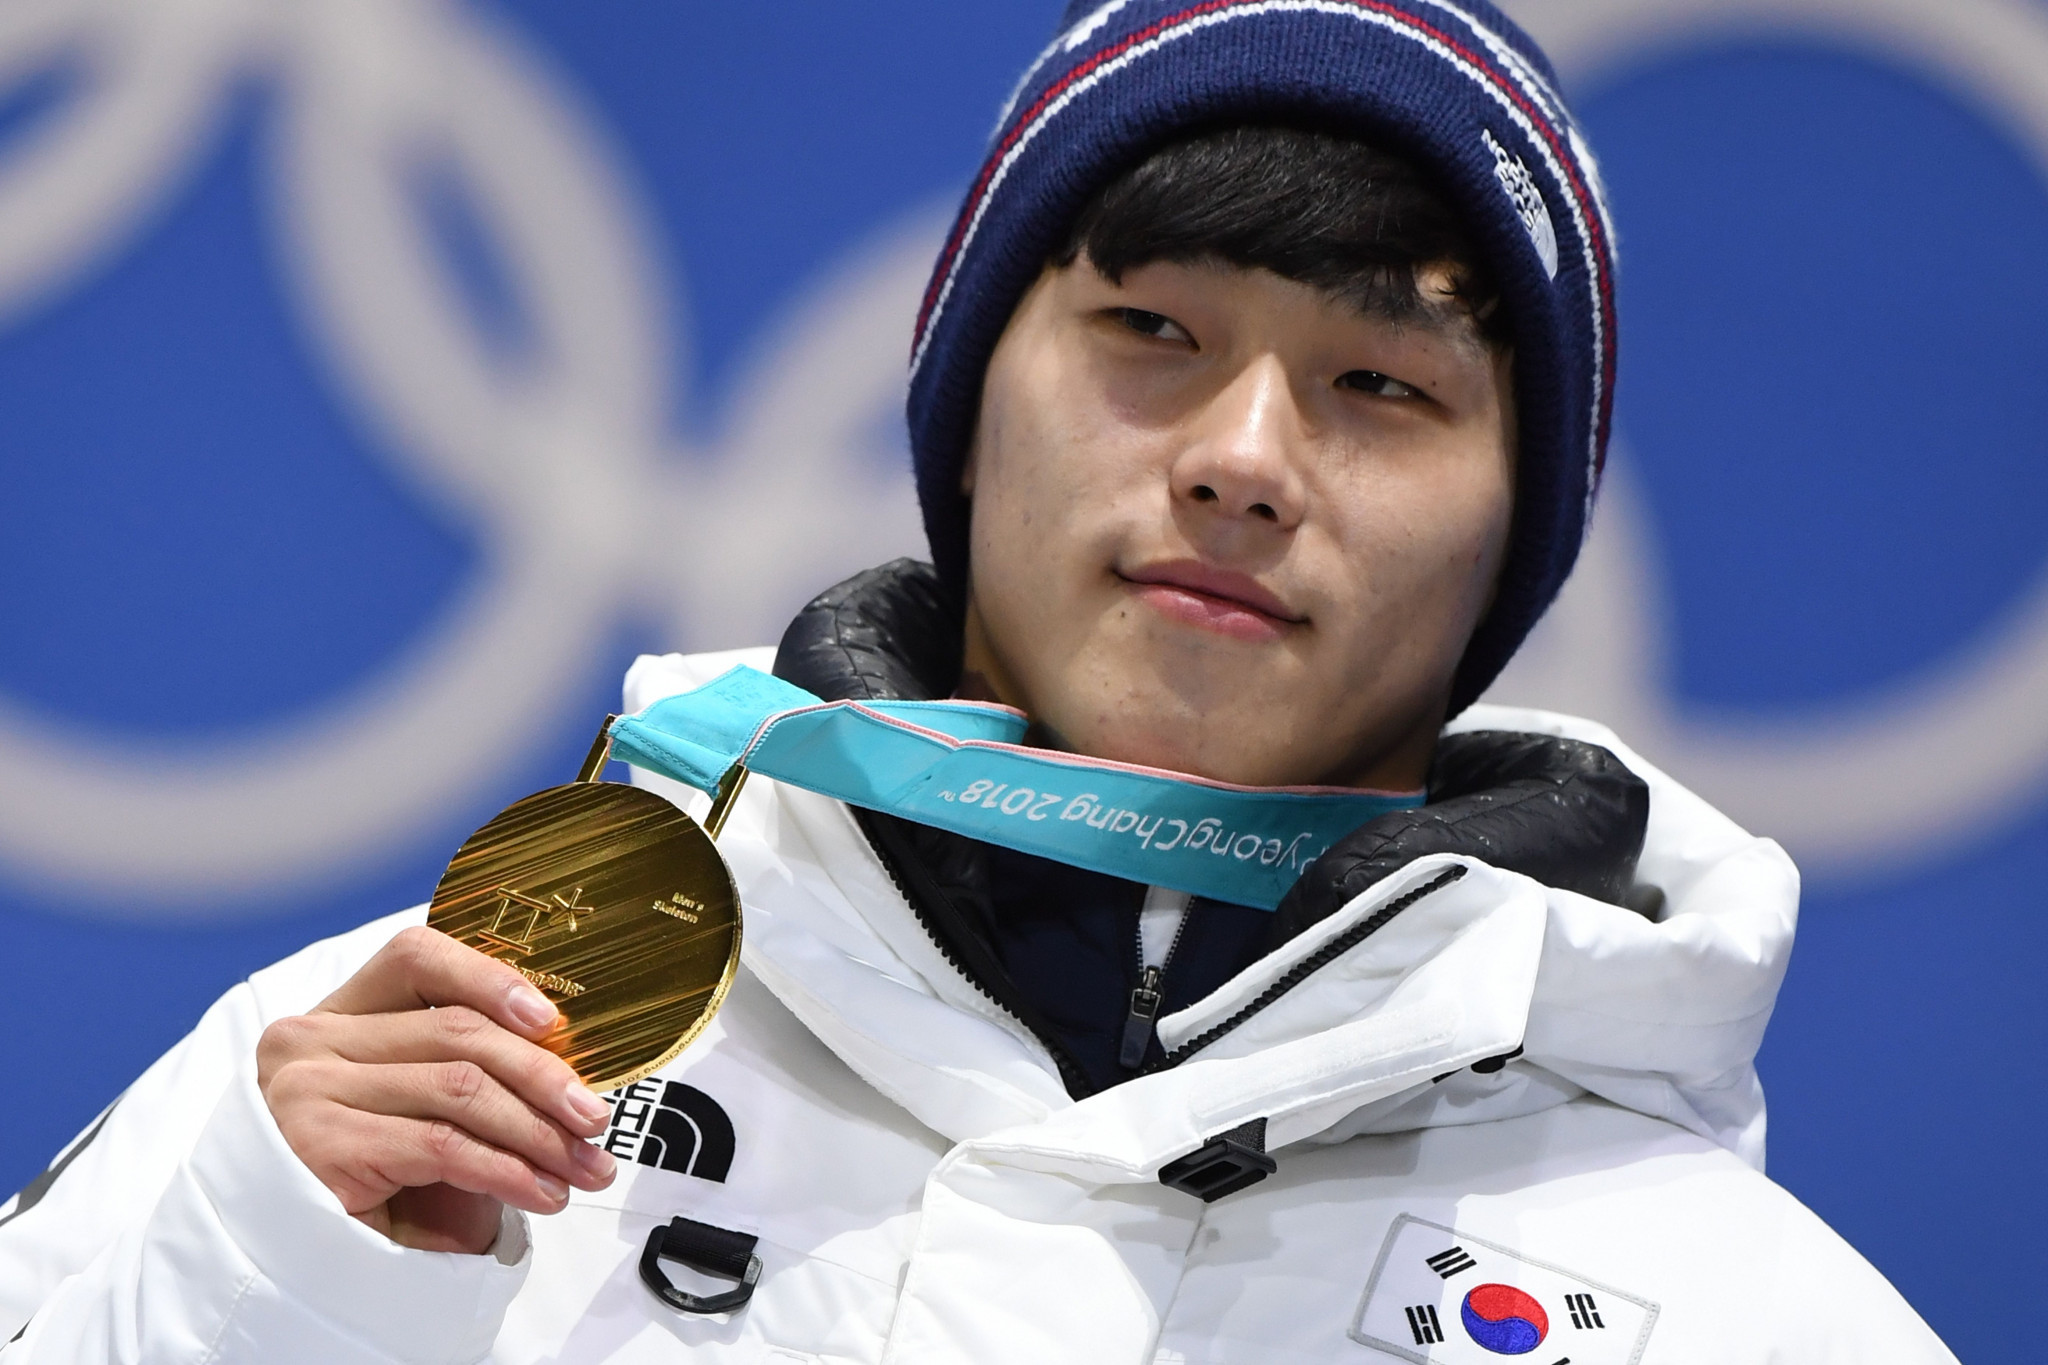 Olympic champion Yun looks to extend one point lead at IBSF World Cup event in Lake Placid